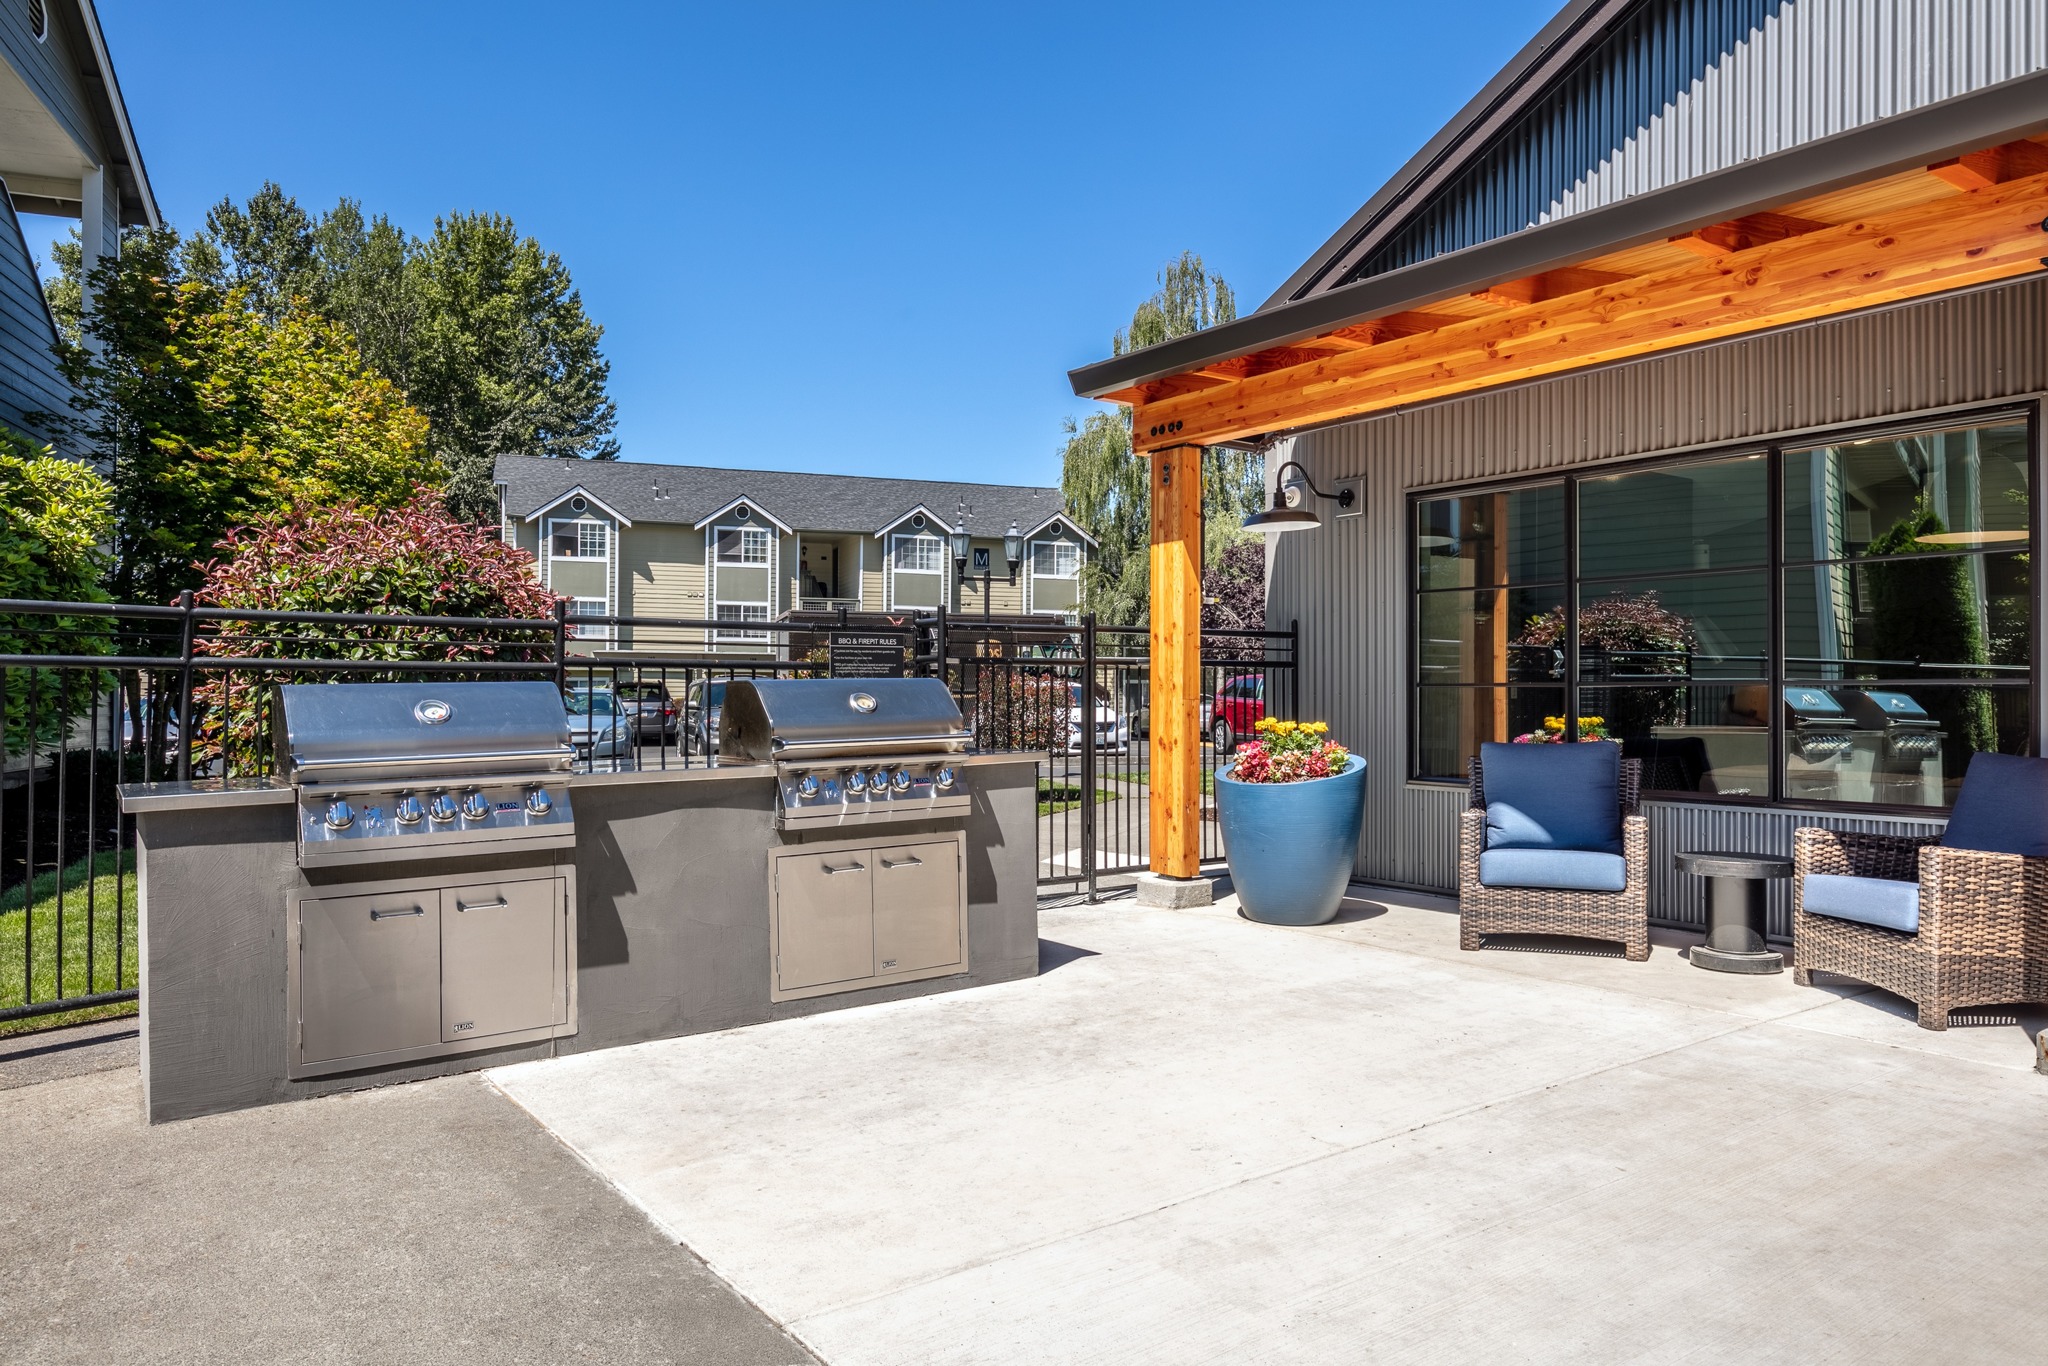 BBQ Patio with Gas Grills & Outdoor Seating | Lakewood WA Apartments | Citizen & Oake